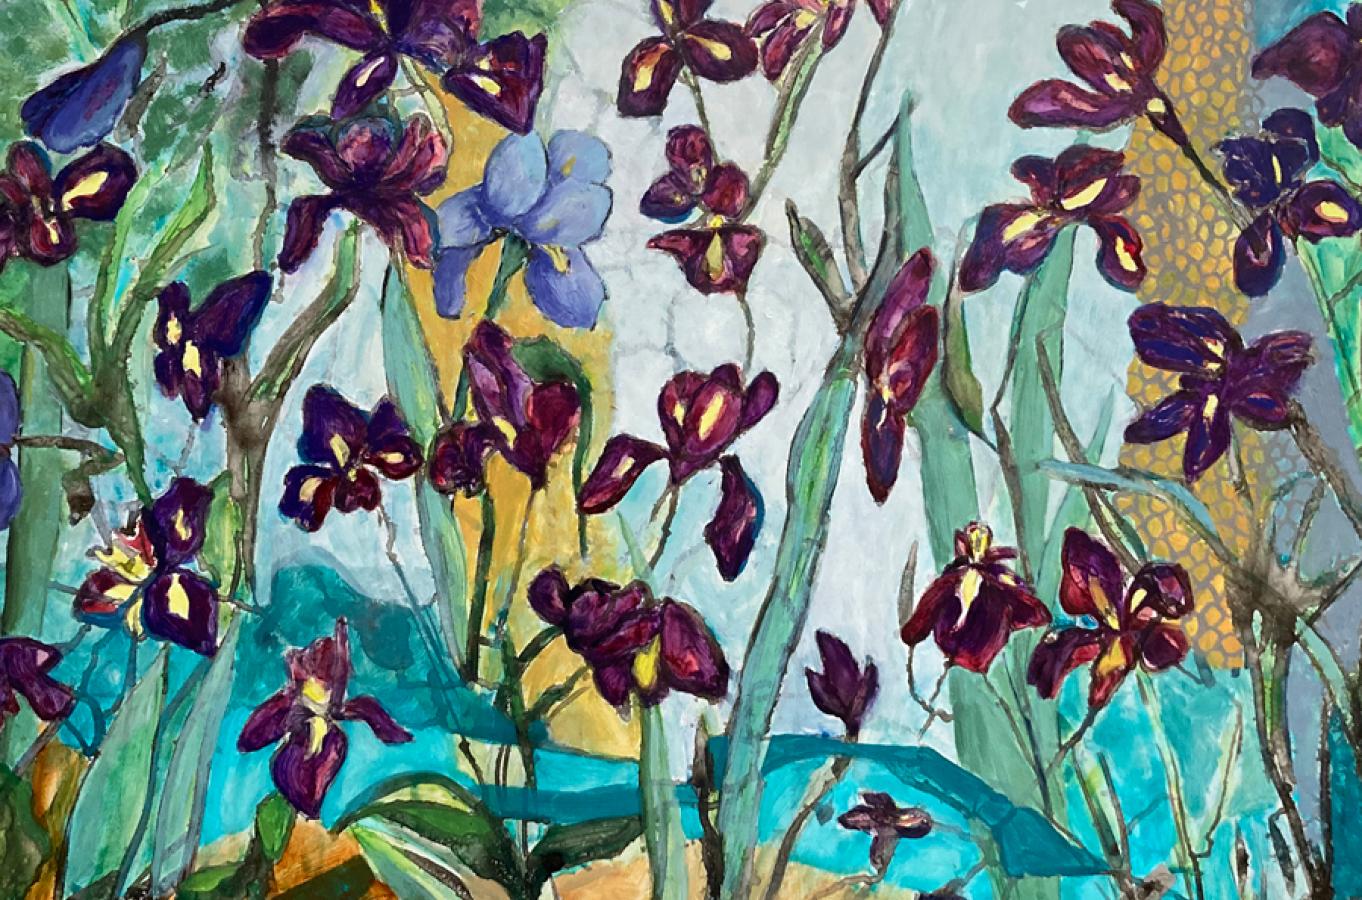 Irises     Ink,  Watercolor, Oil on Yupo paper 26” x 40”   Framed 31 ¼” x 45 ¼” - Art by Julie England